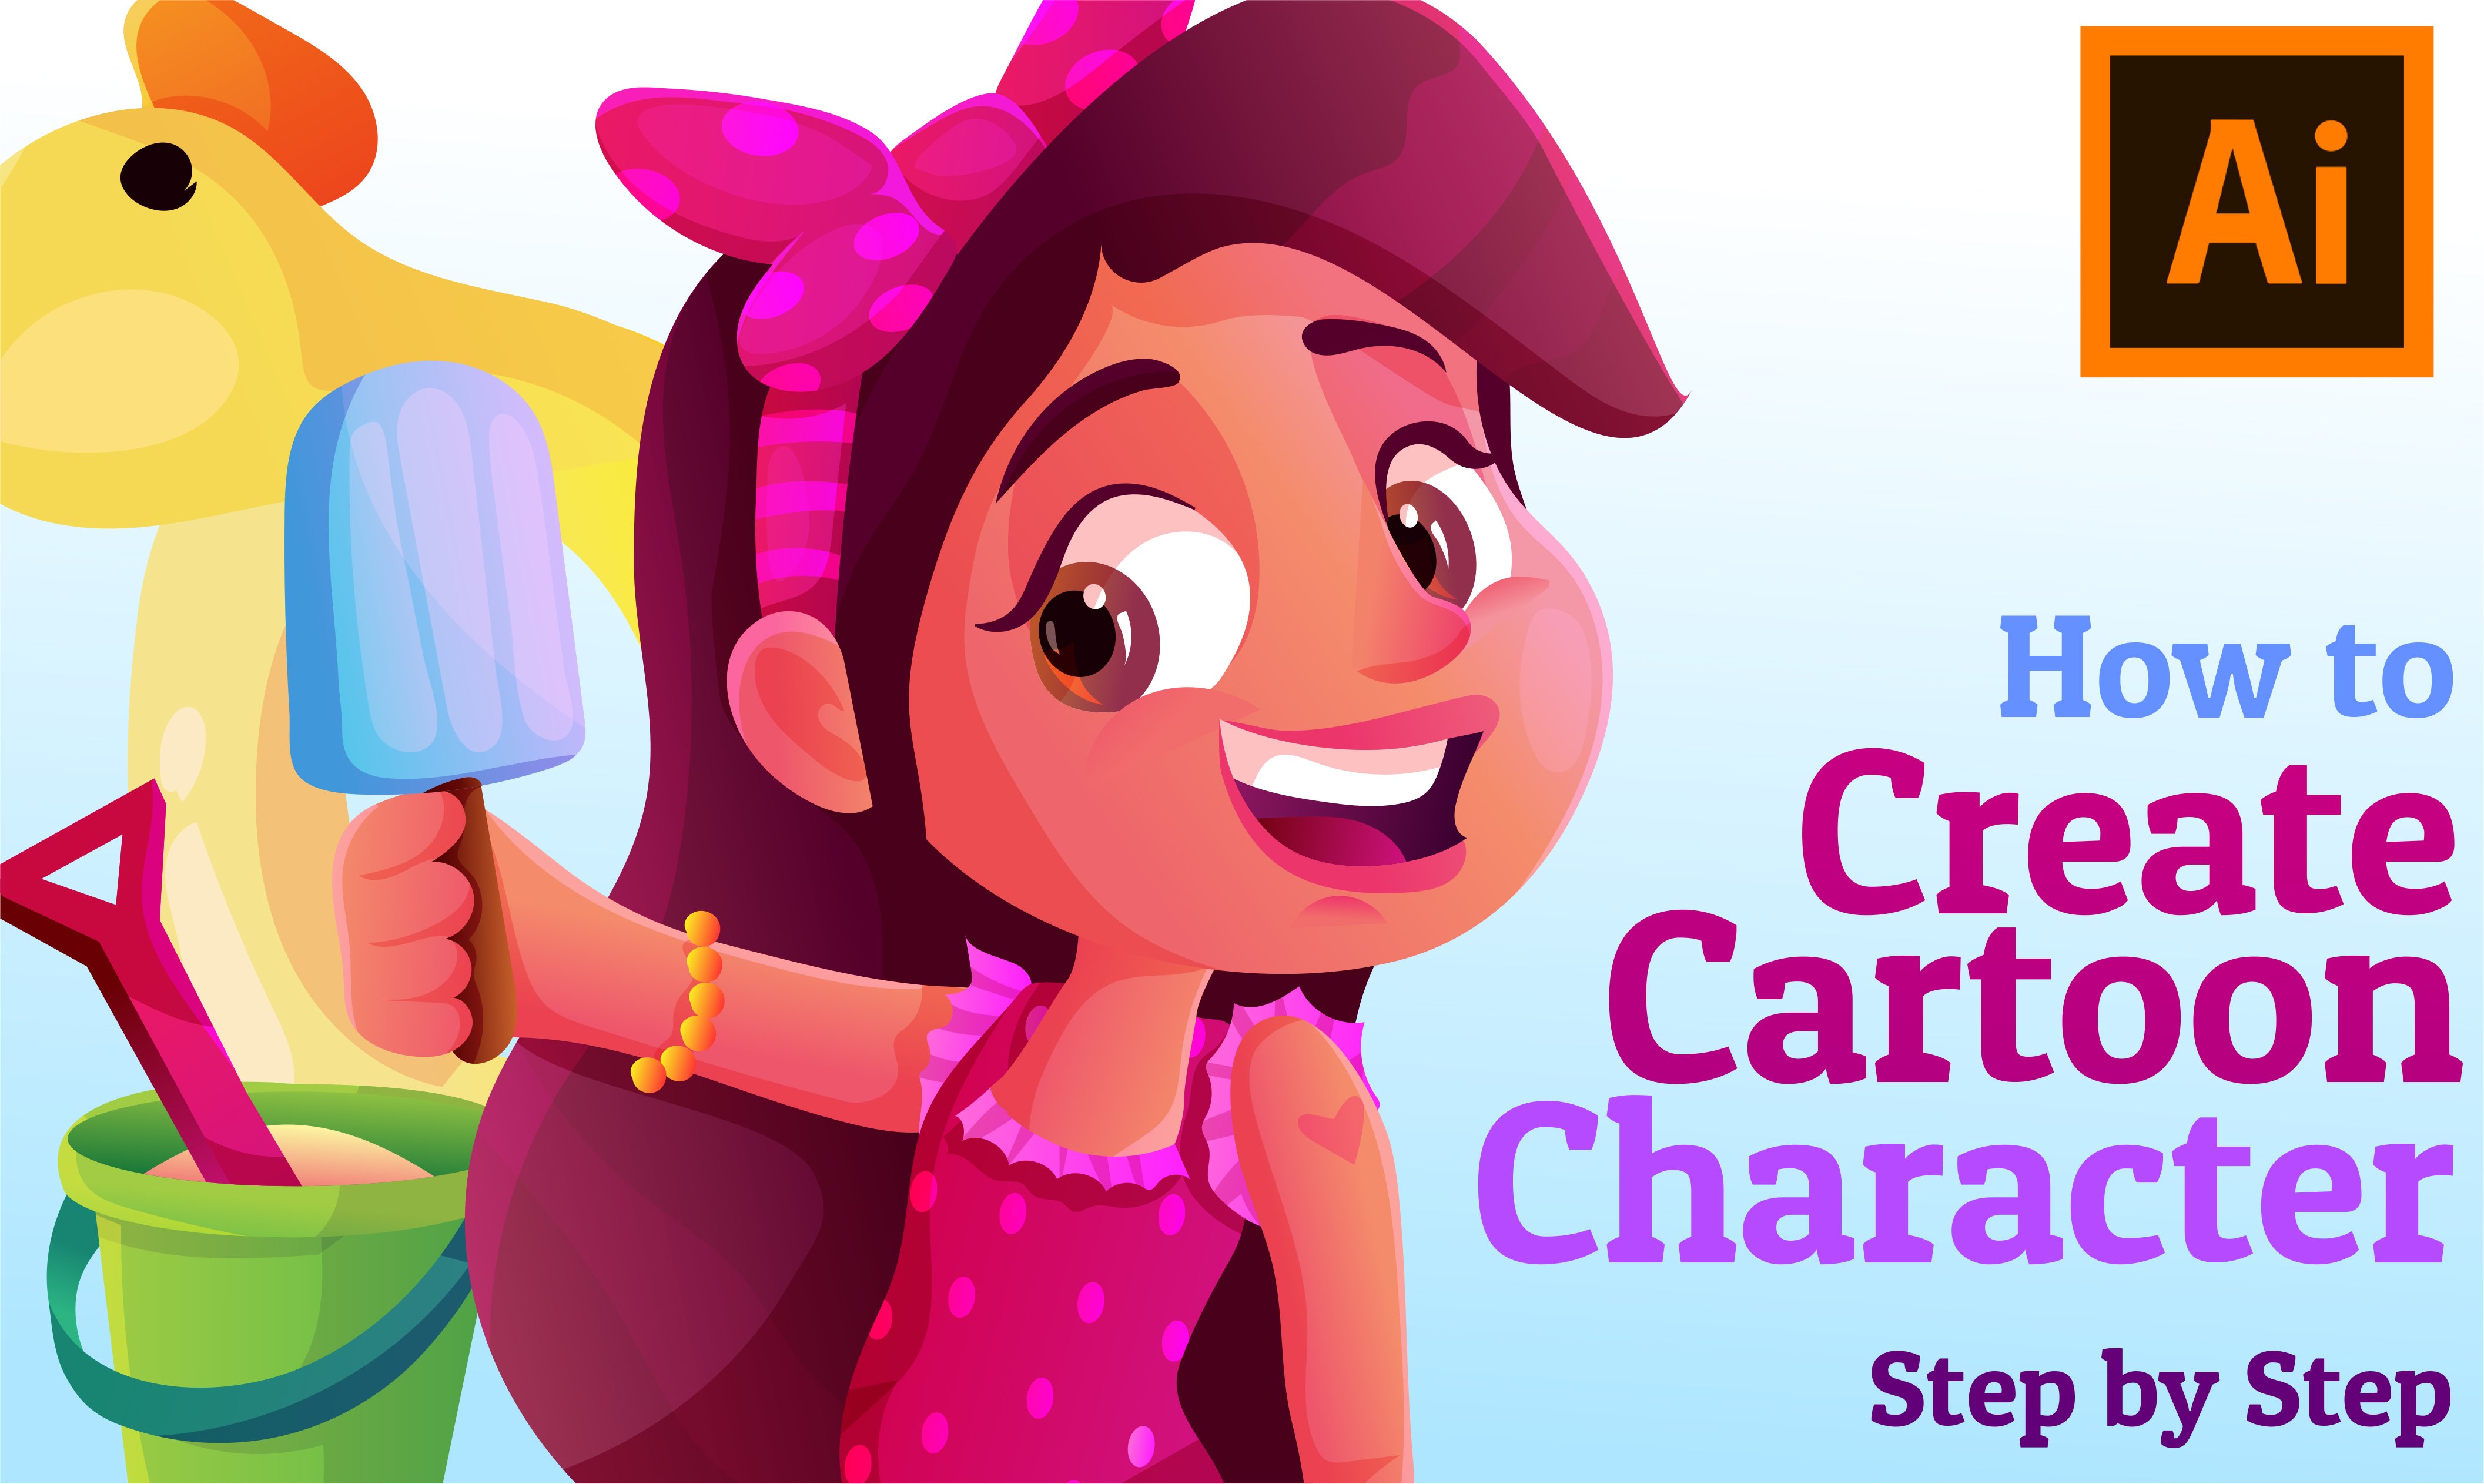 Create Cartoon Character With Adobe Illustrator – Step by Step!